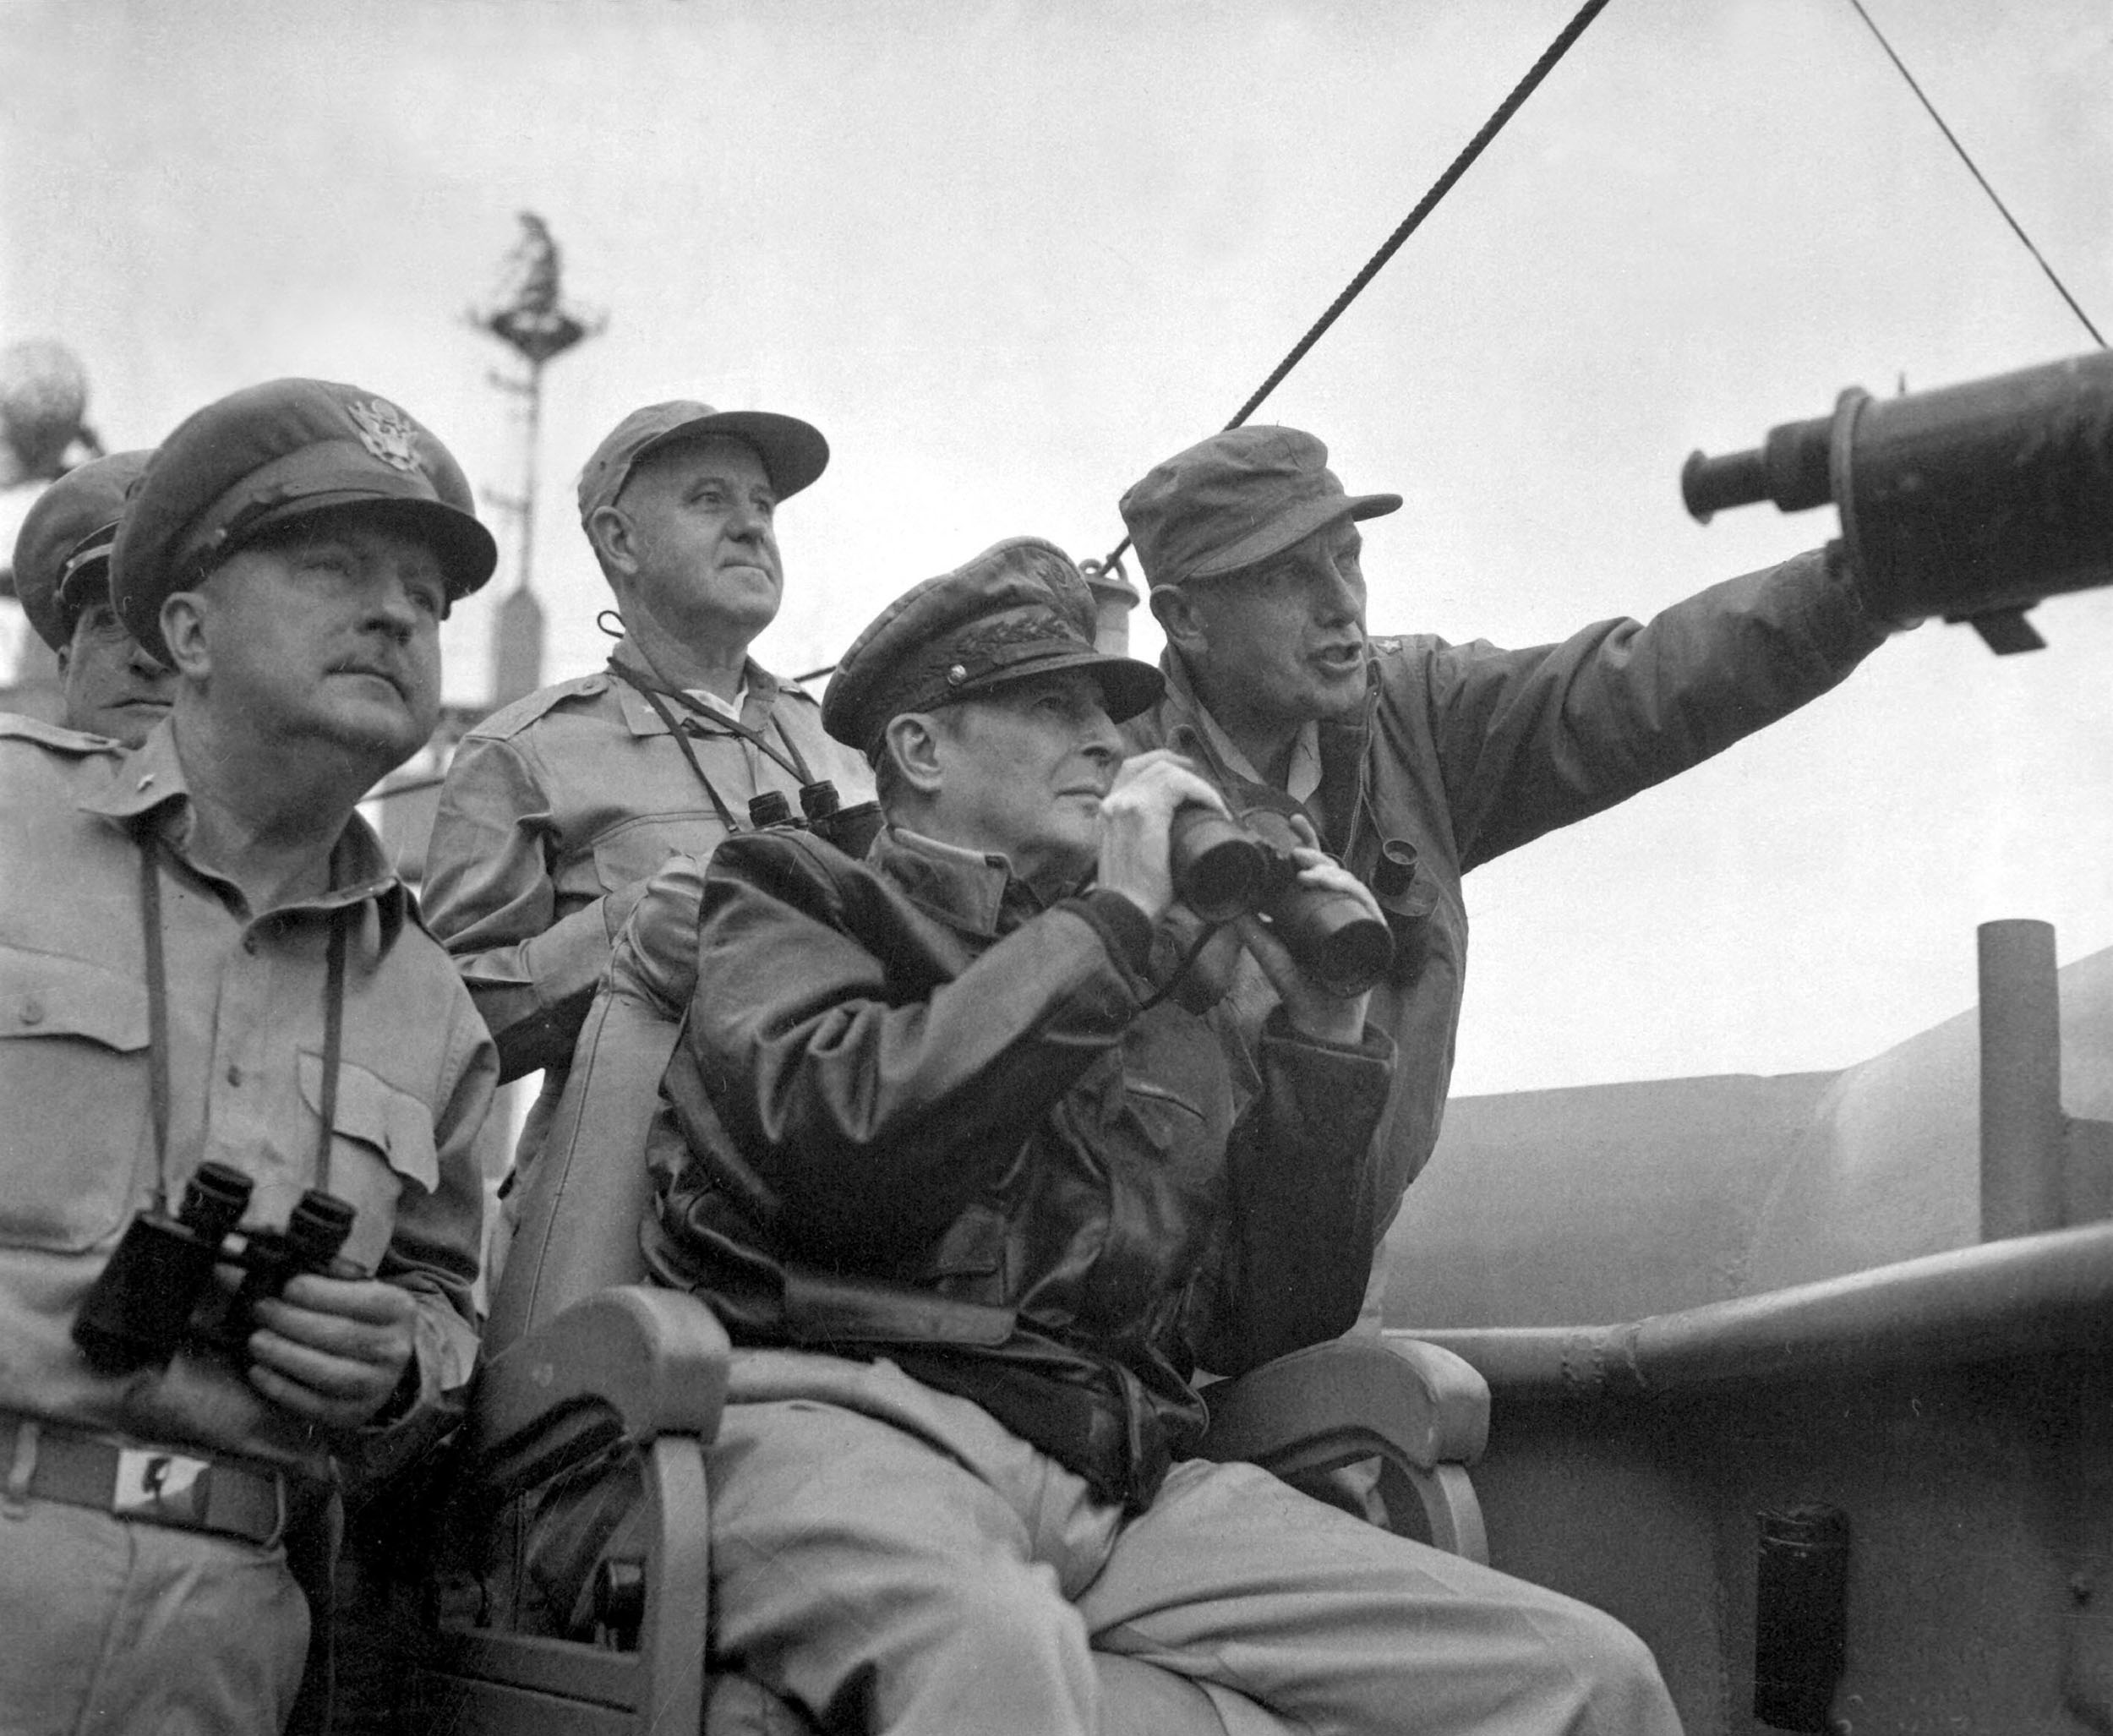 Army Gen. Douglas MacArthur looking at the bombing of Incheon, south Korea from his warship